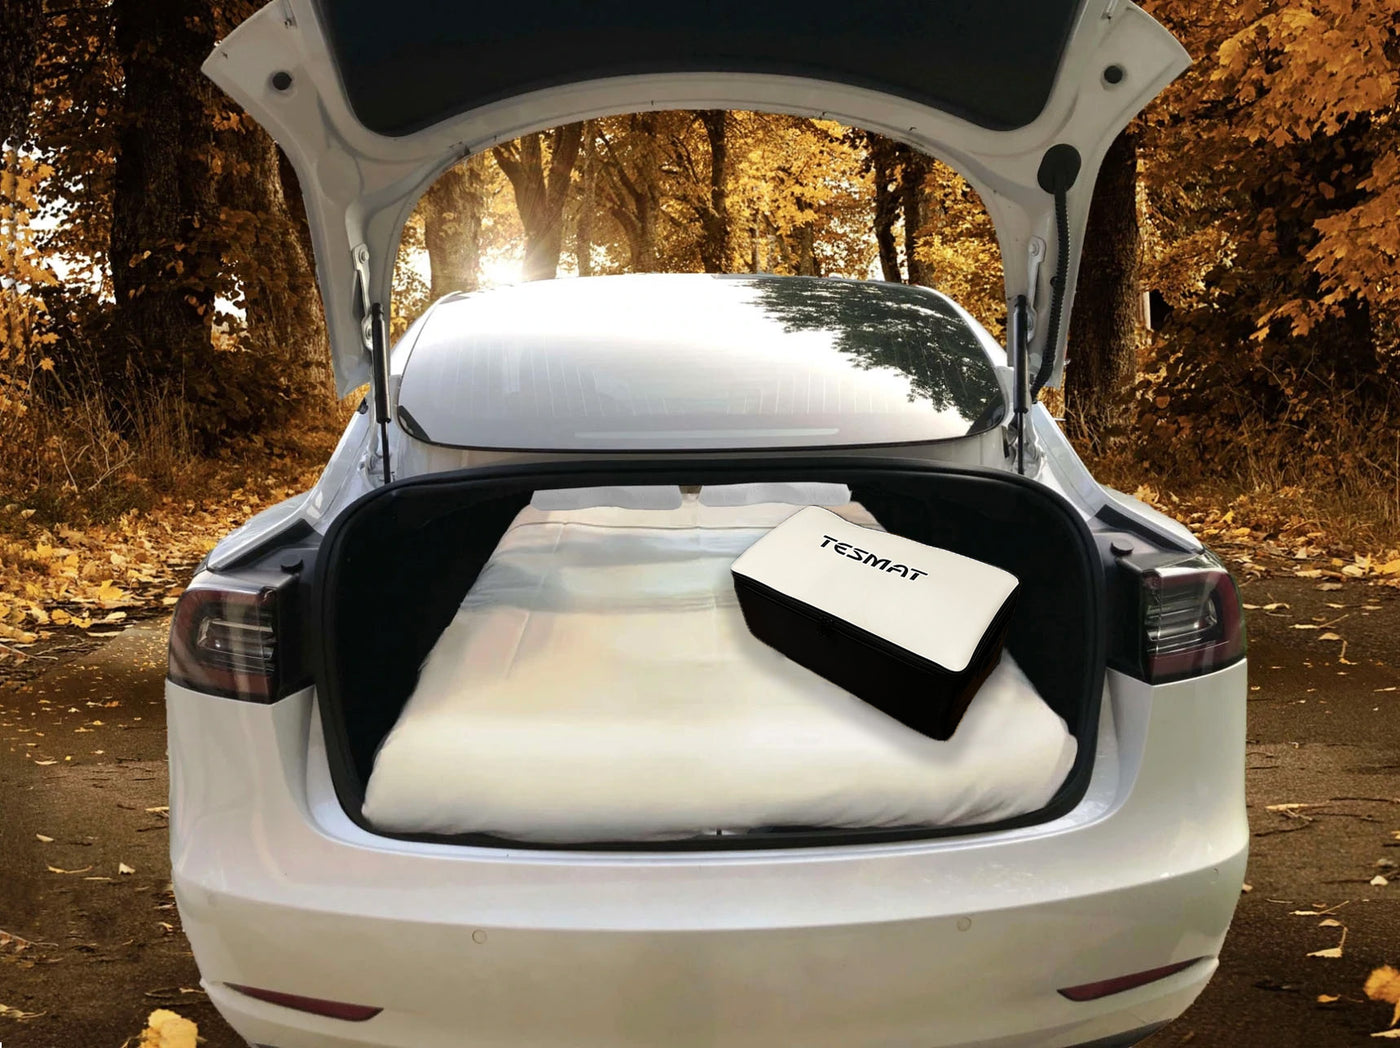 TESMAT  Car Camping Mattress and Privacy Screen for Tesla Model 3 and Model  Y